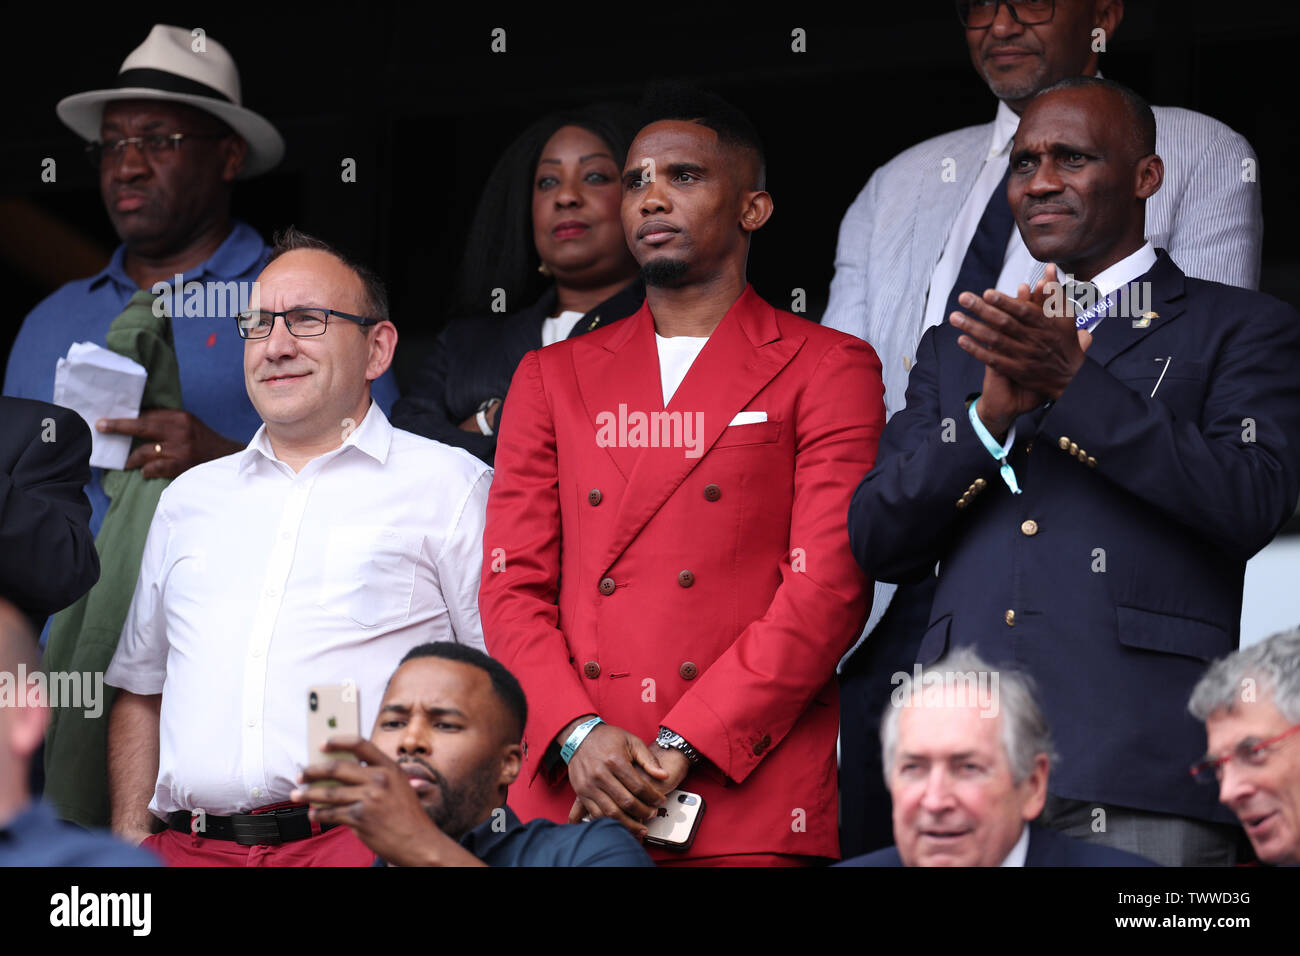 Valenciennes, France. 23rd June, 2019. Former football player Samuel Eto'o (C) of Cameroon looks on during the round of 16 match between England and Cameroon at the 2019 FIFA Women's World Cup in Valenciennes, France, on June 23, 2019. Credit: Zheng Huansong/Xinhua/Alamy Live News Stock Photo